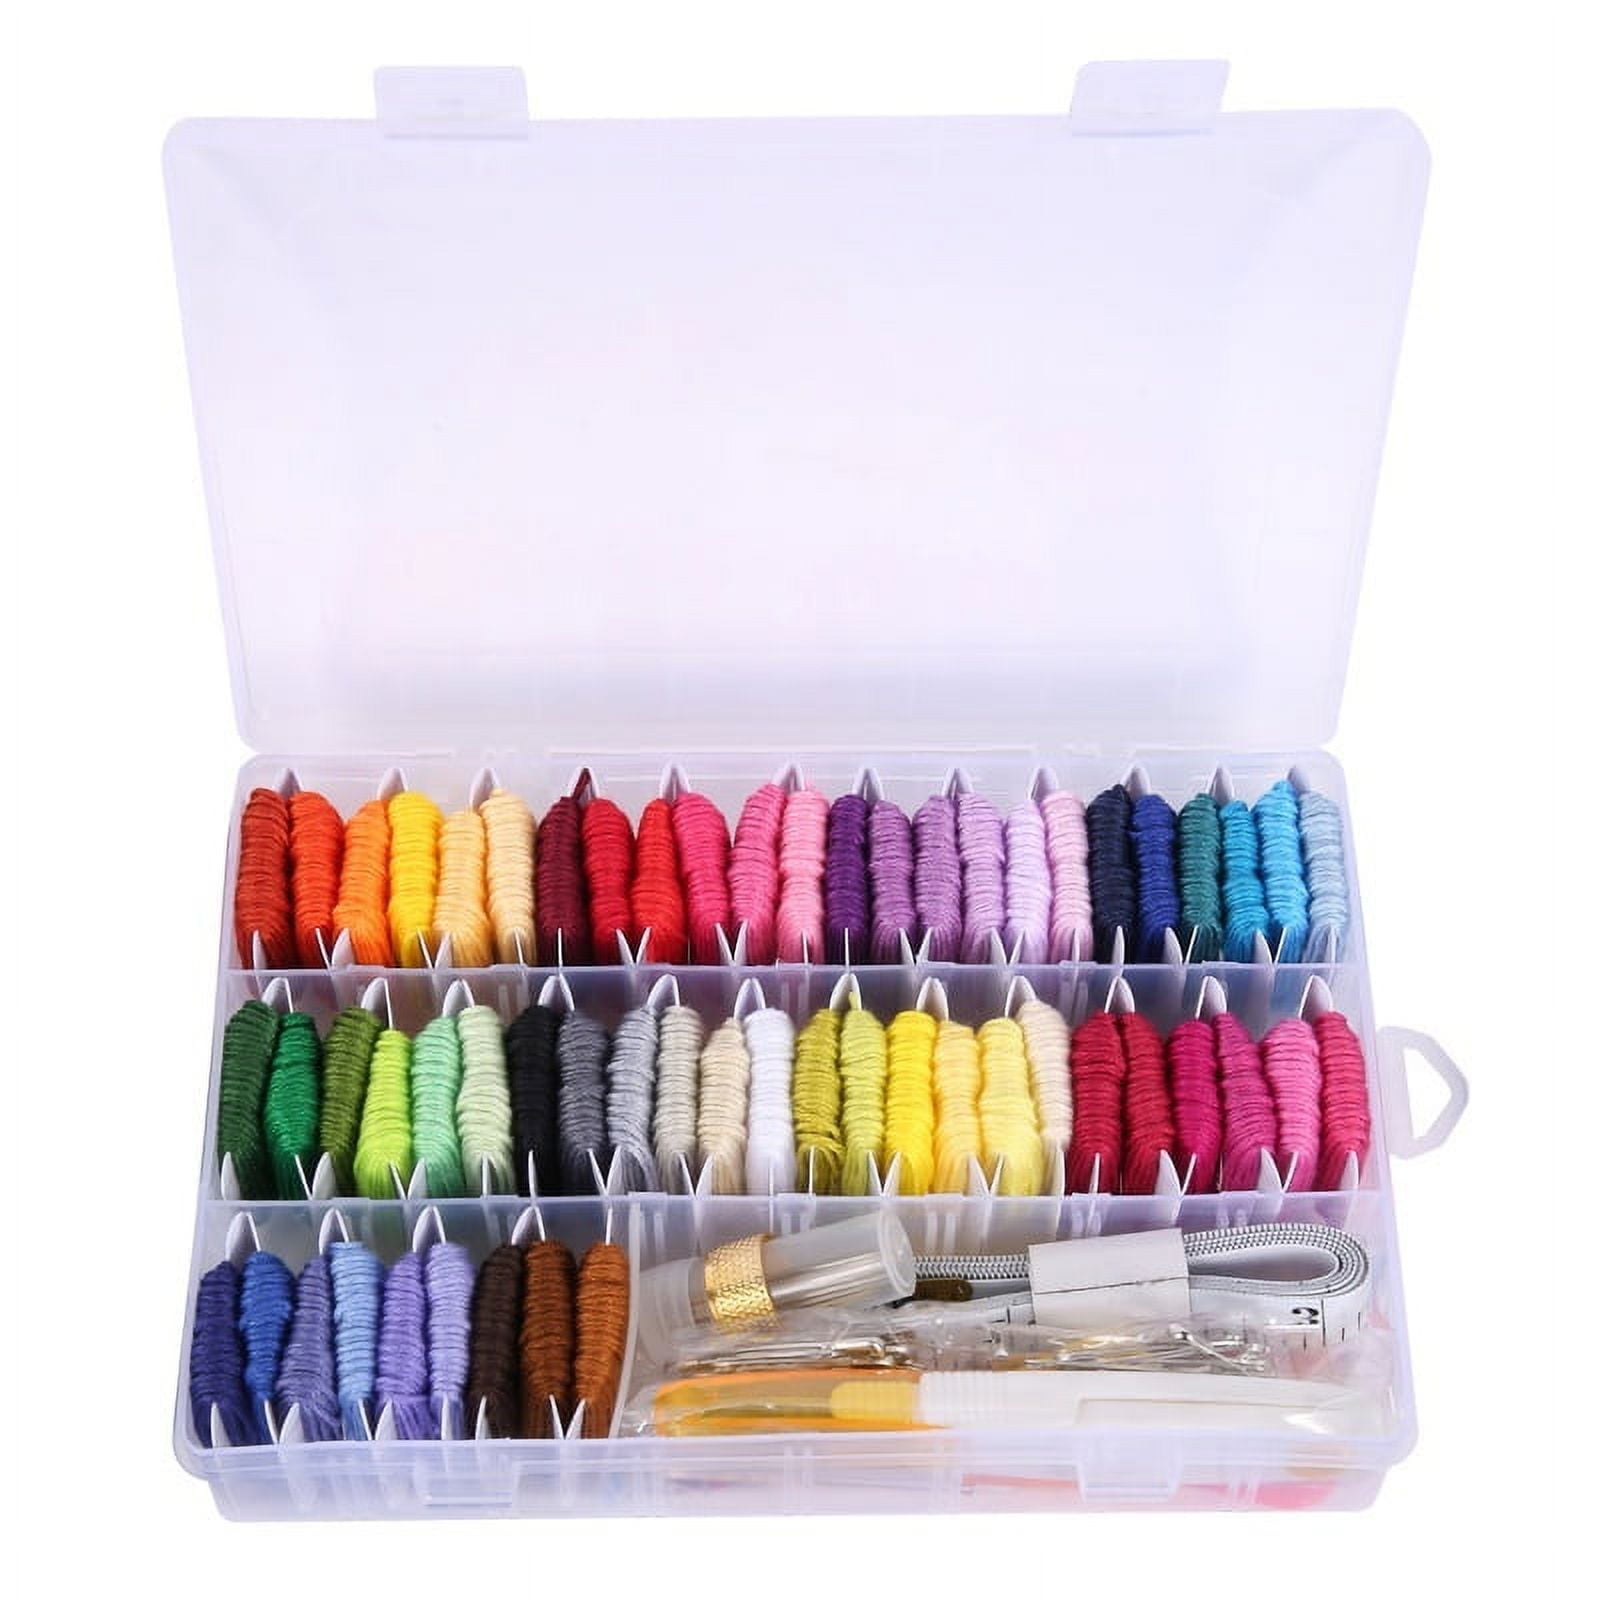 606Pcs Friendship Bracelet String Kit with Storage Box, 56 Colors  Embroidery Floss Thread, 500 Beads, 50 Cross Stitch Tools for Hand  Embroidery